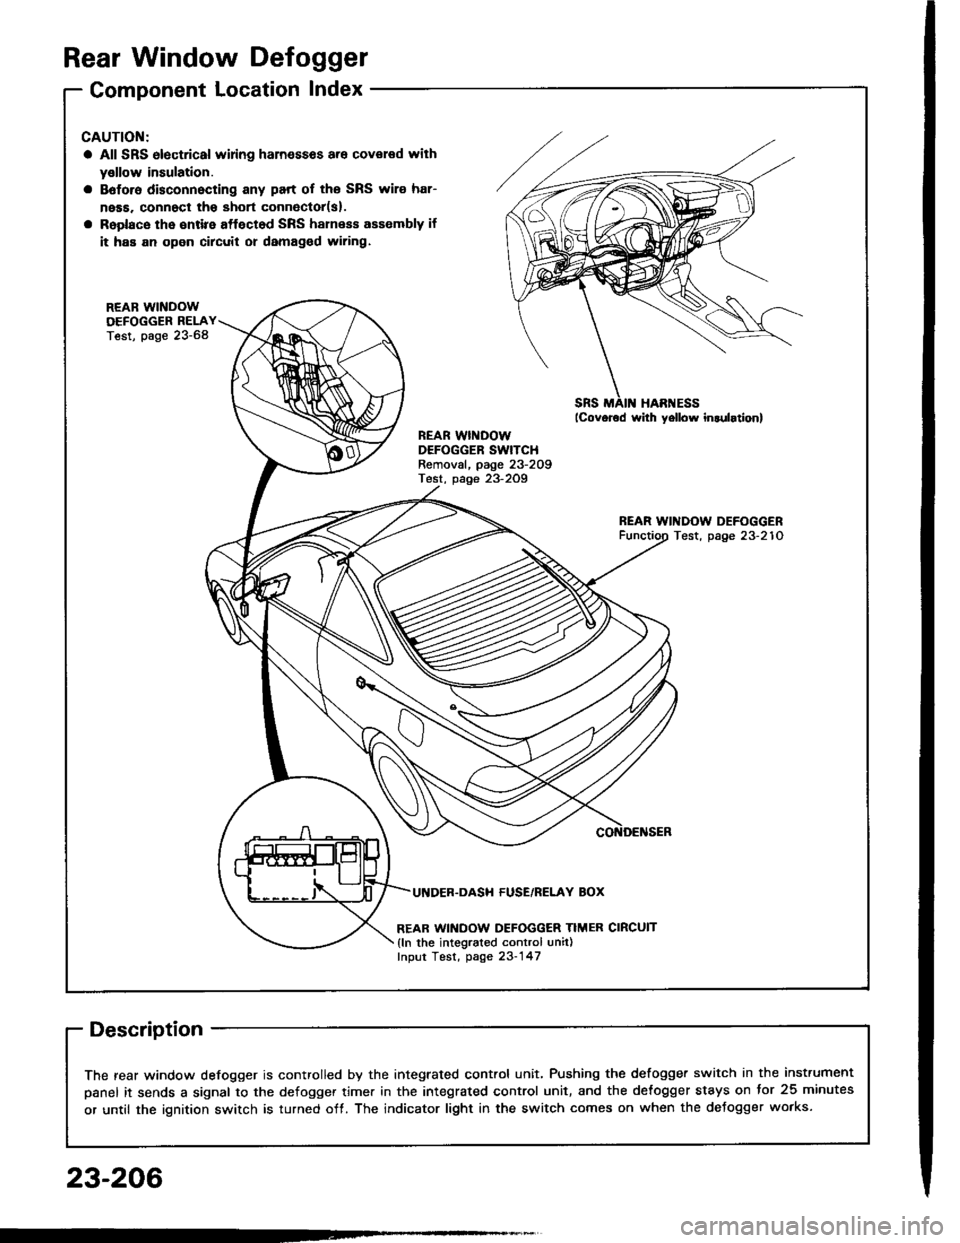 HONDA INTEGRA 1994 4.G Service Manual Rear Window Defogger
Component Location Index
CAUTION:
a All SRS olectrical wi ng ham€$6s are covoled with
y€llow insulation.
B6foro disconnocting any part of ths SRS wire har-
ness. connoct tho s